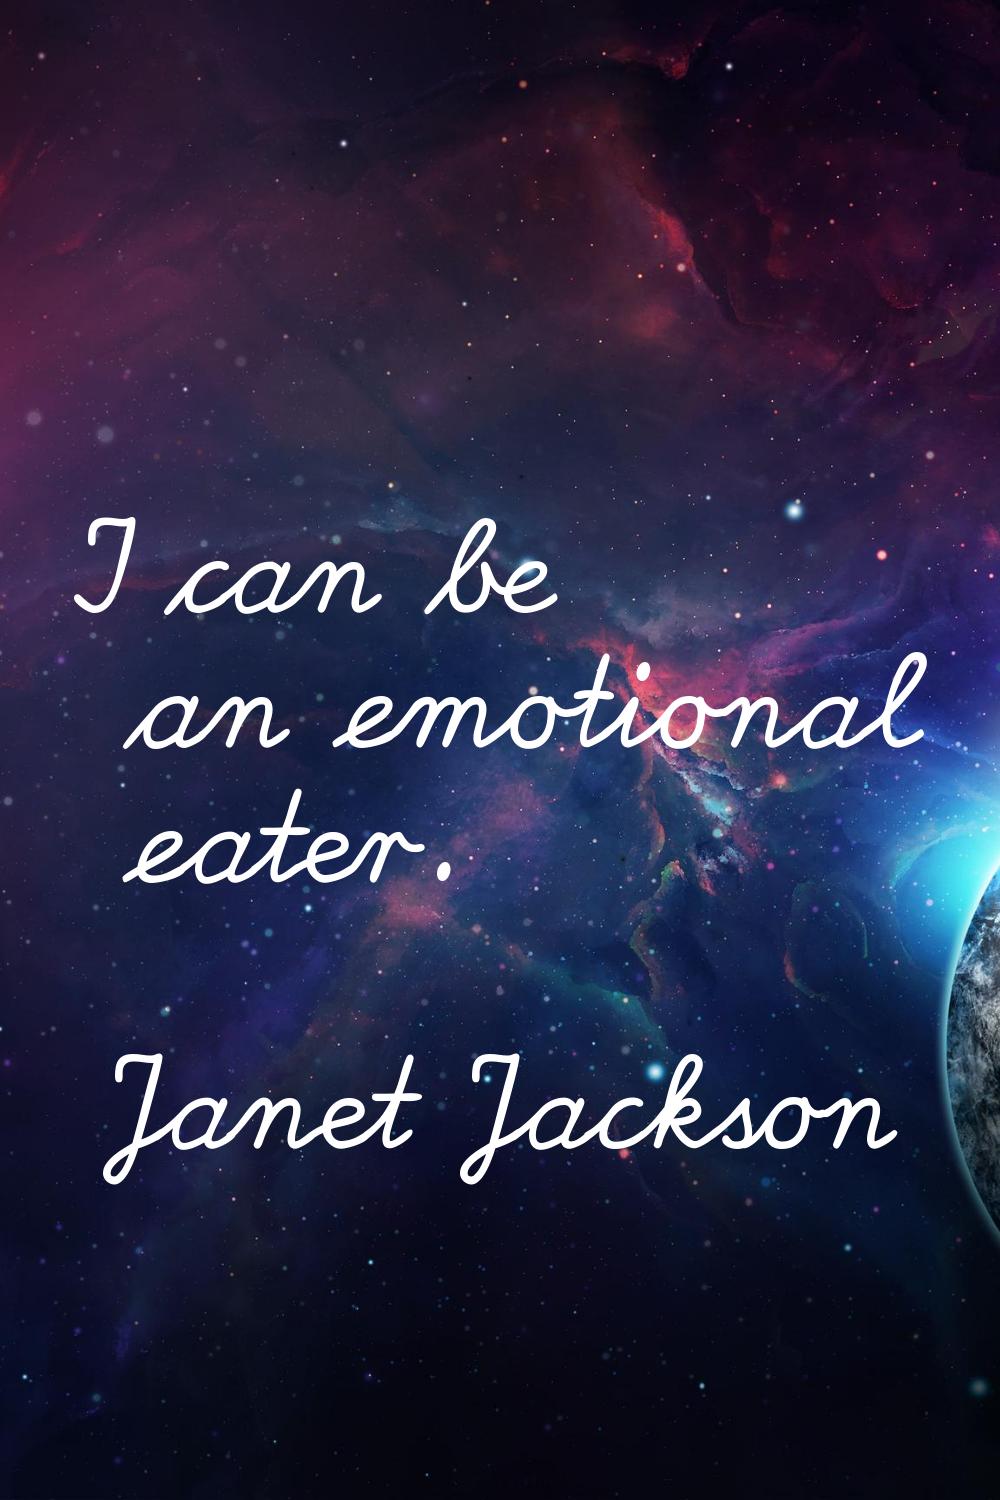 I can be an emotional eater.